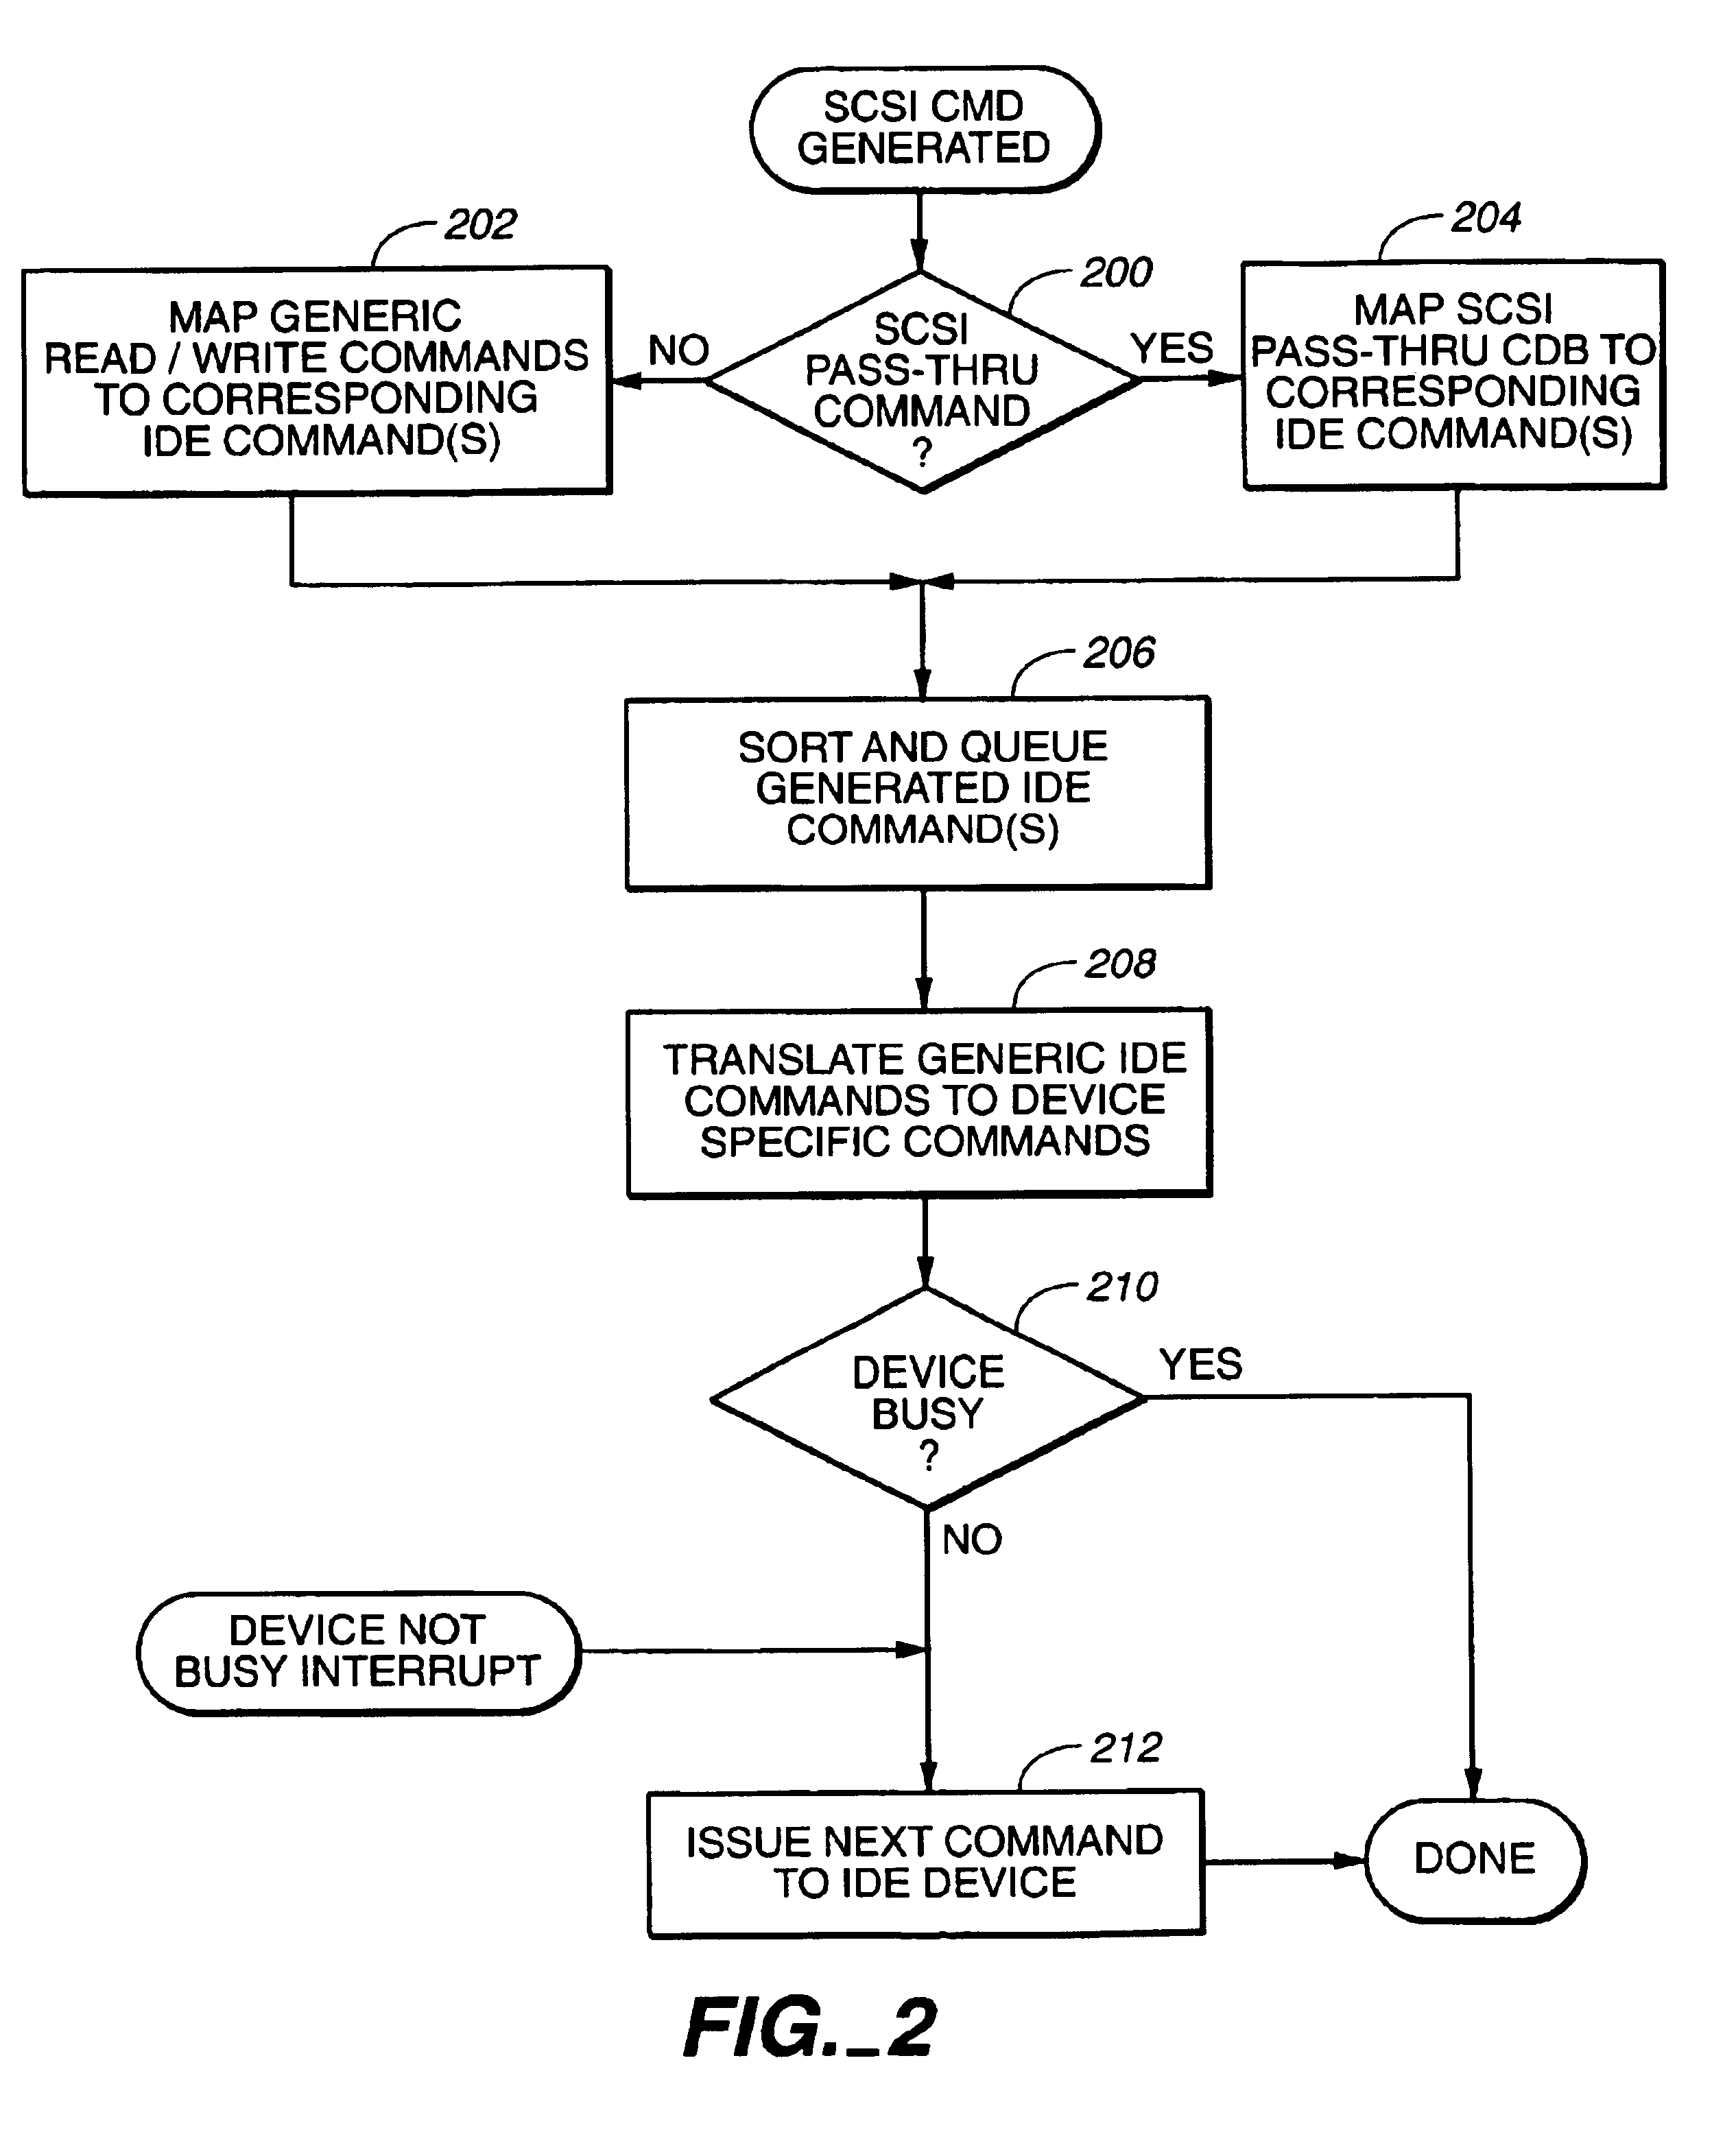 Methods and structure for SCSI/IDE translation in a storage subsystem